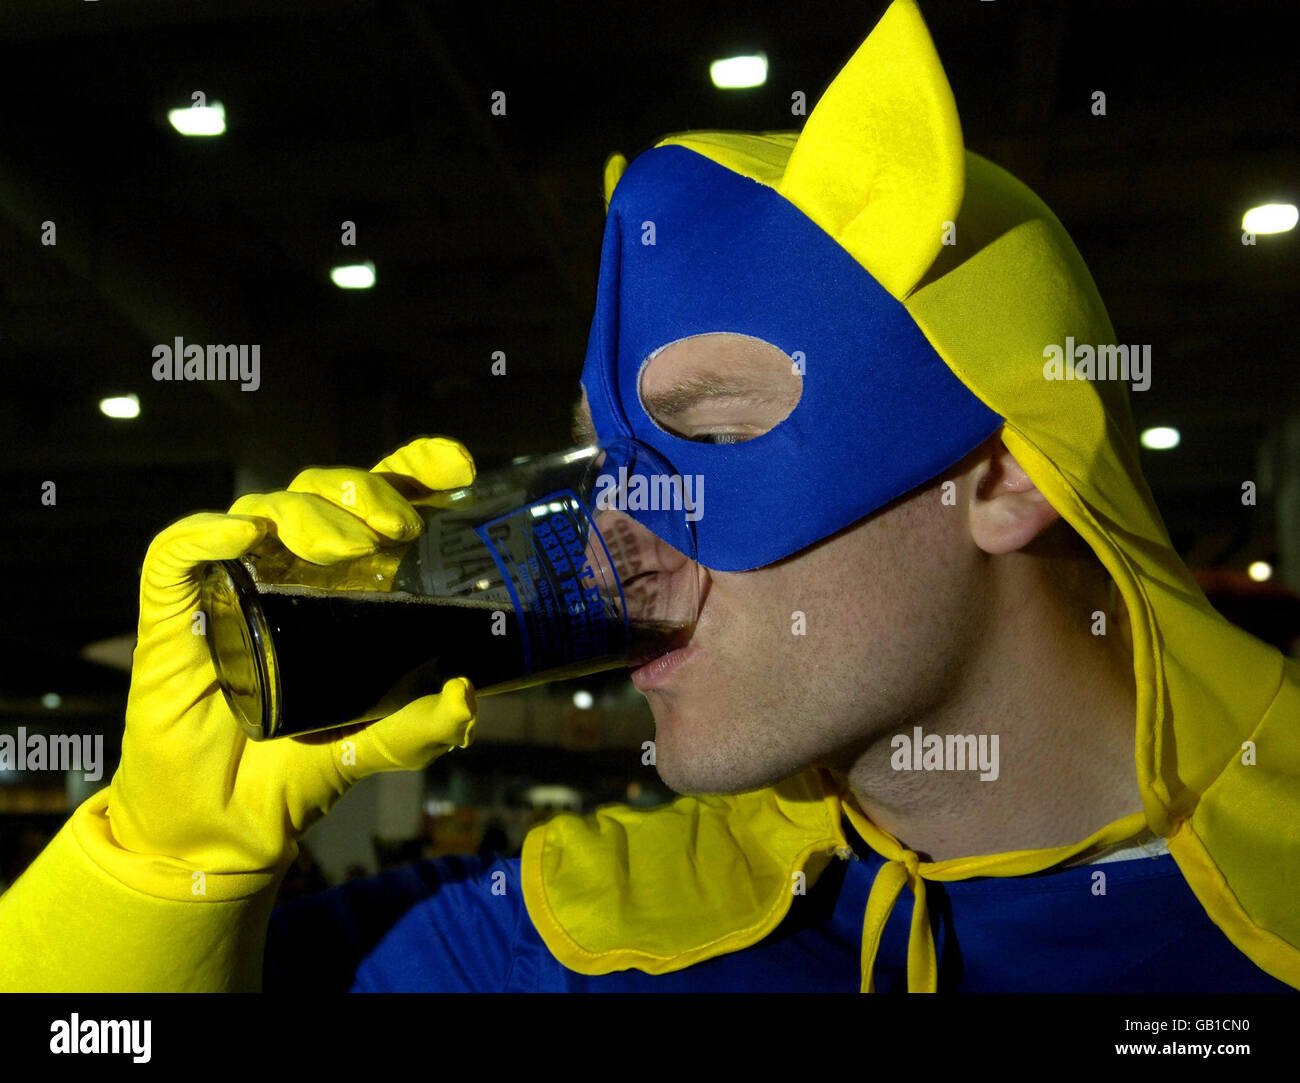 Bananaman, aka Rob Barford from Essex, enjoys the Great British Beer Festival in Earls Court, London. Stock Photo